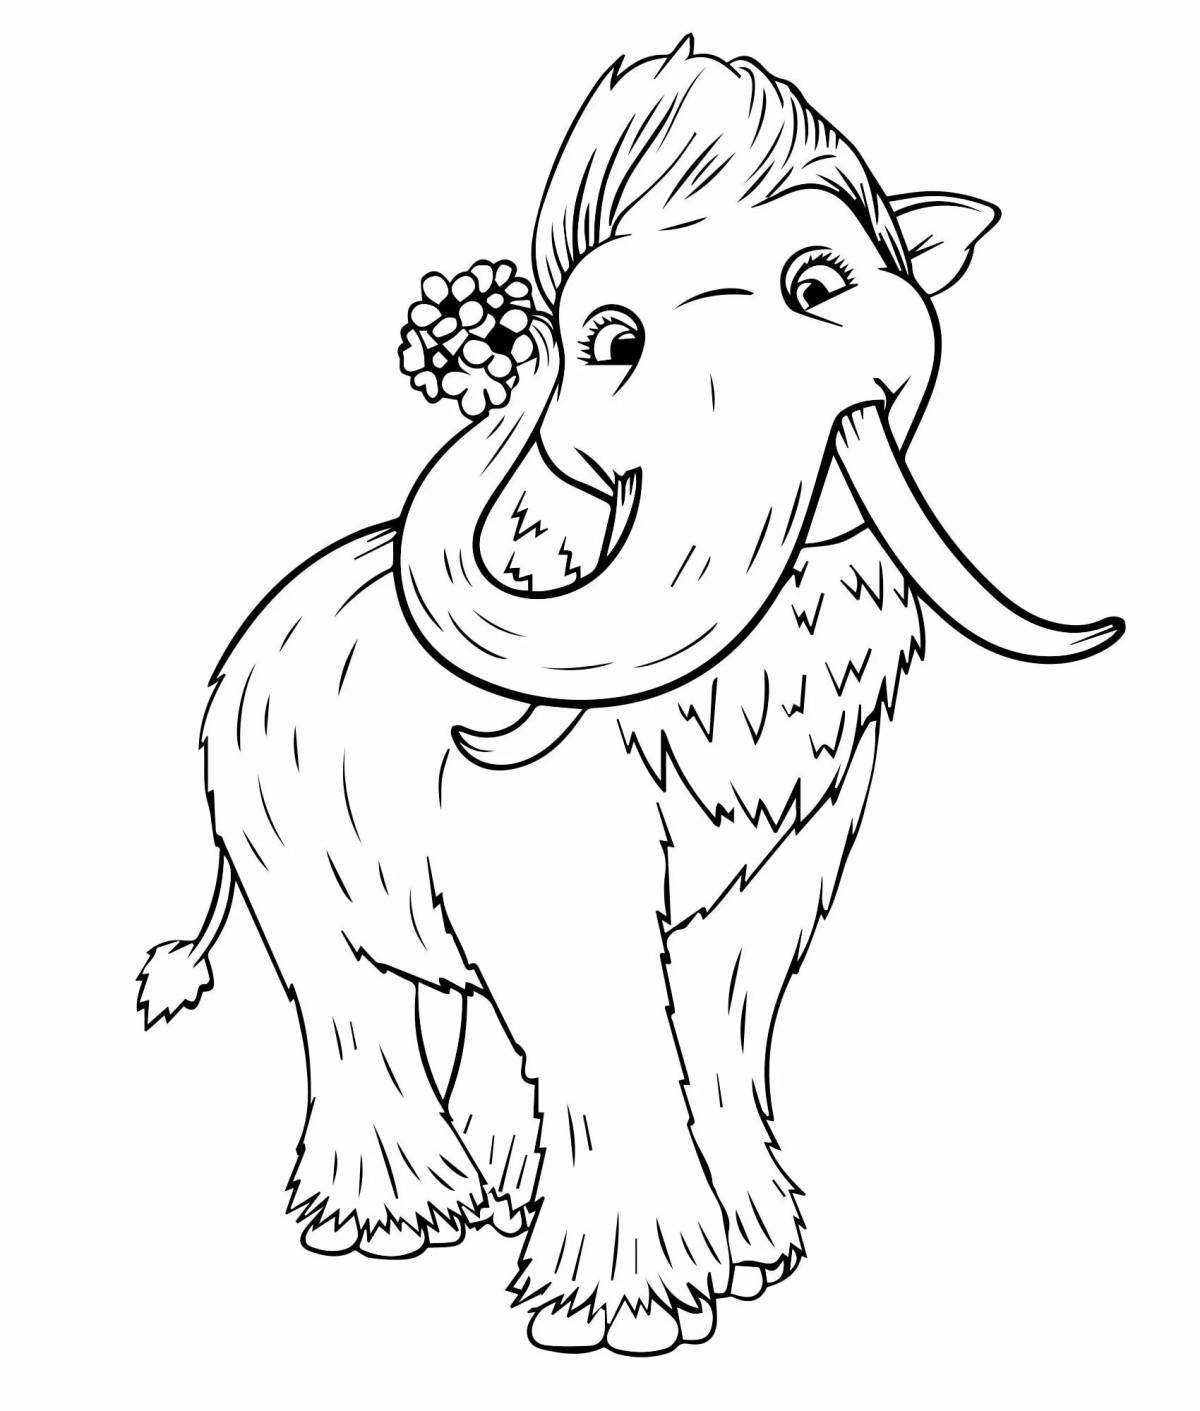 Playful mammoth coloring book for kids